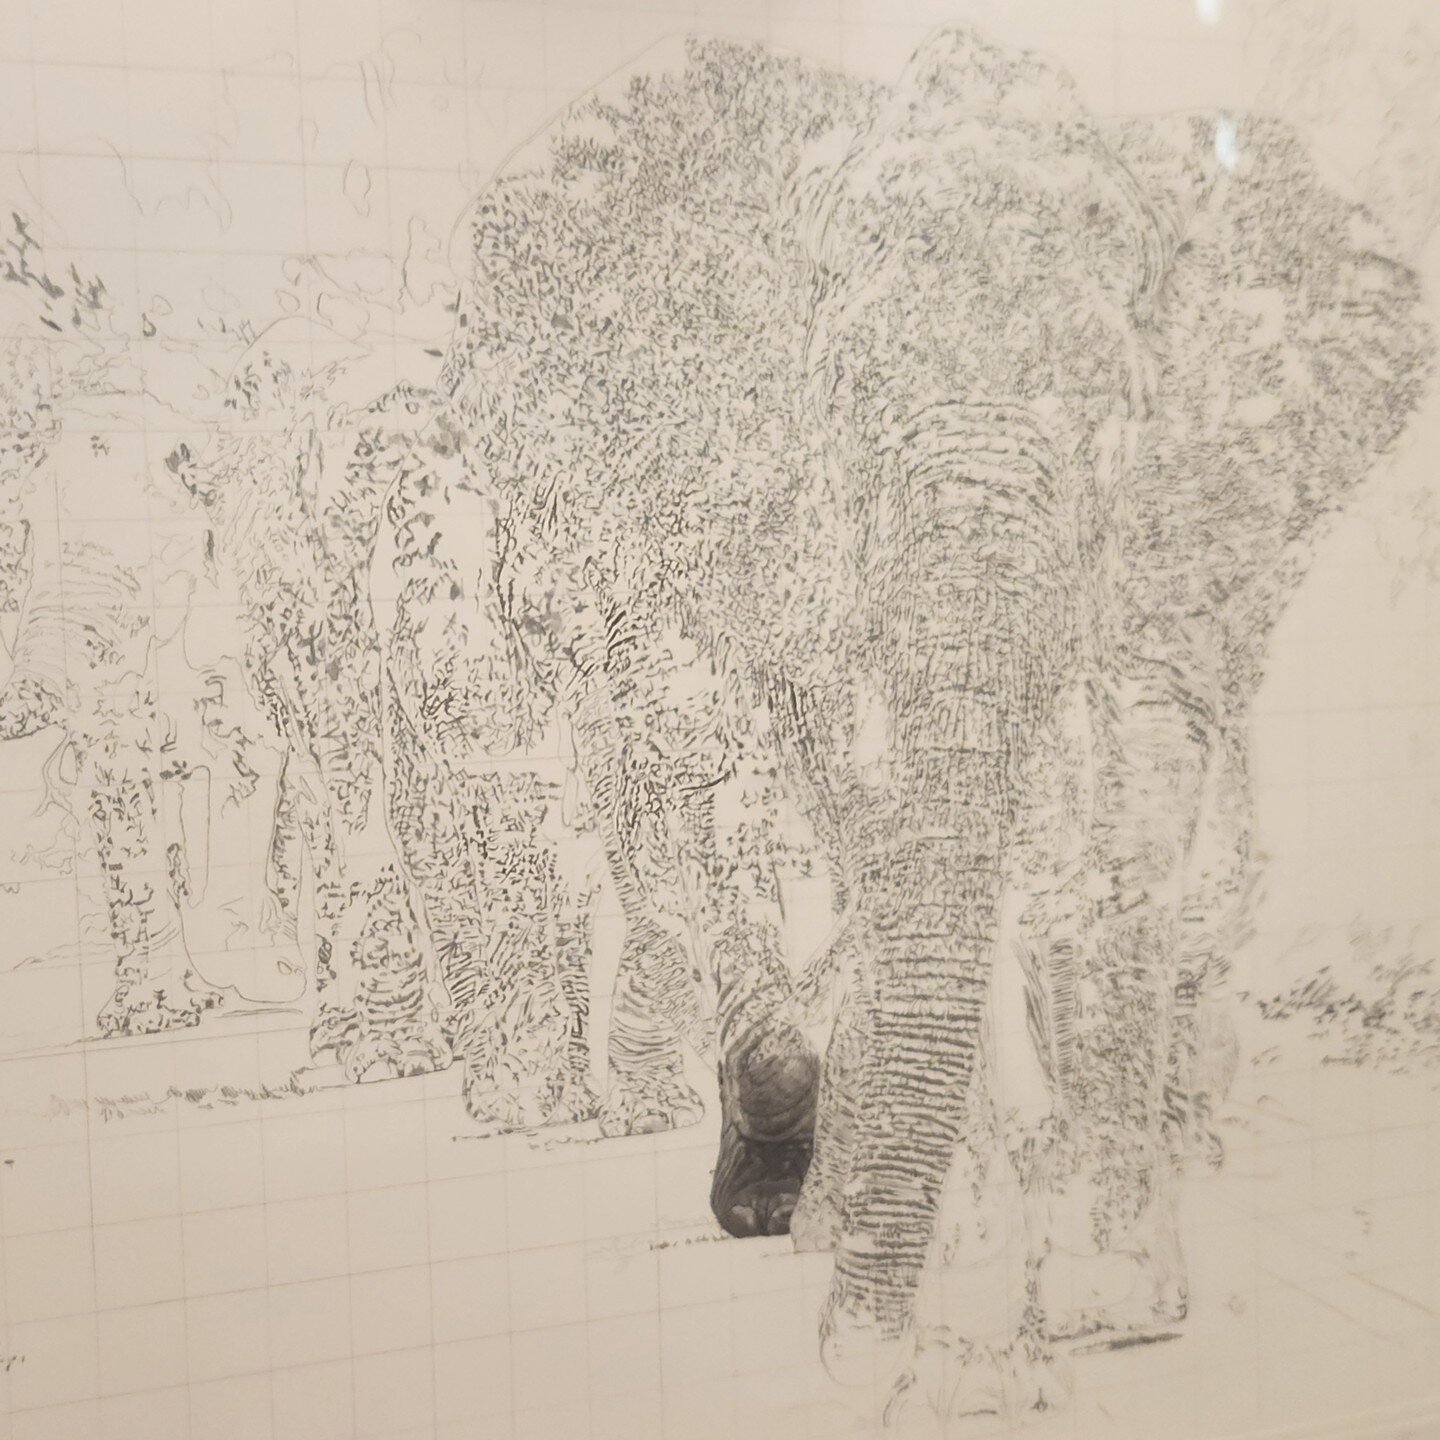 The beginning of &quot;Recollections on the Trail&quot;. Started out using my grid system, and I chose to start right in the middle, on one of the feet!

#pencildrawing #graphitedrawing #wildlifeart #wildlifeartwork #wildlifeartists #wildlifeartist #